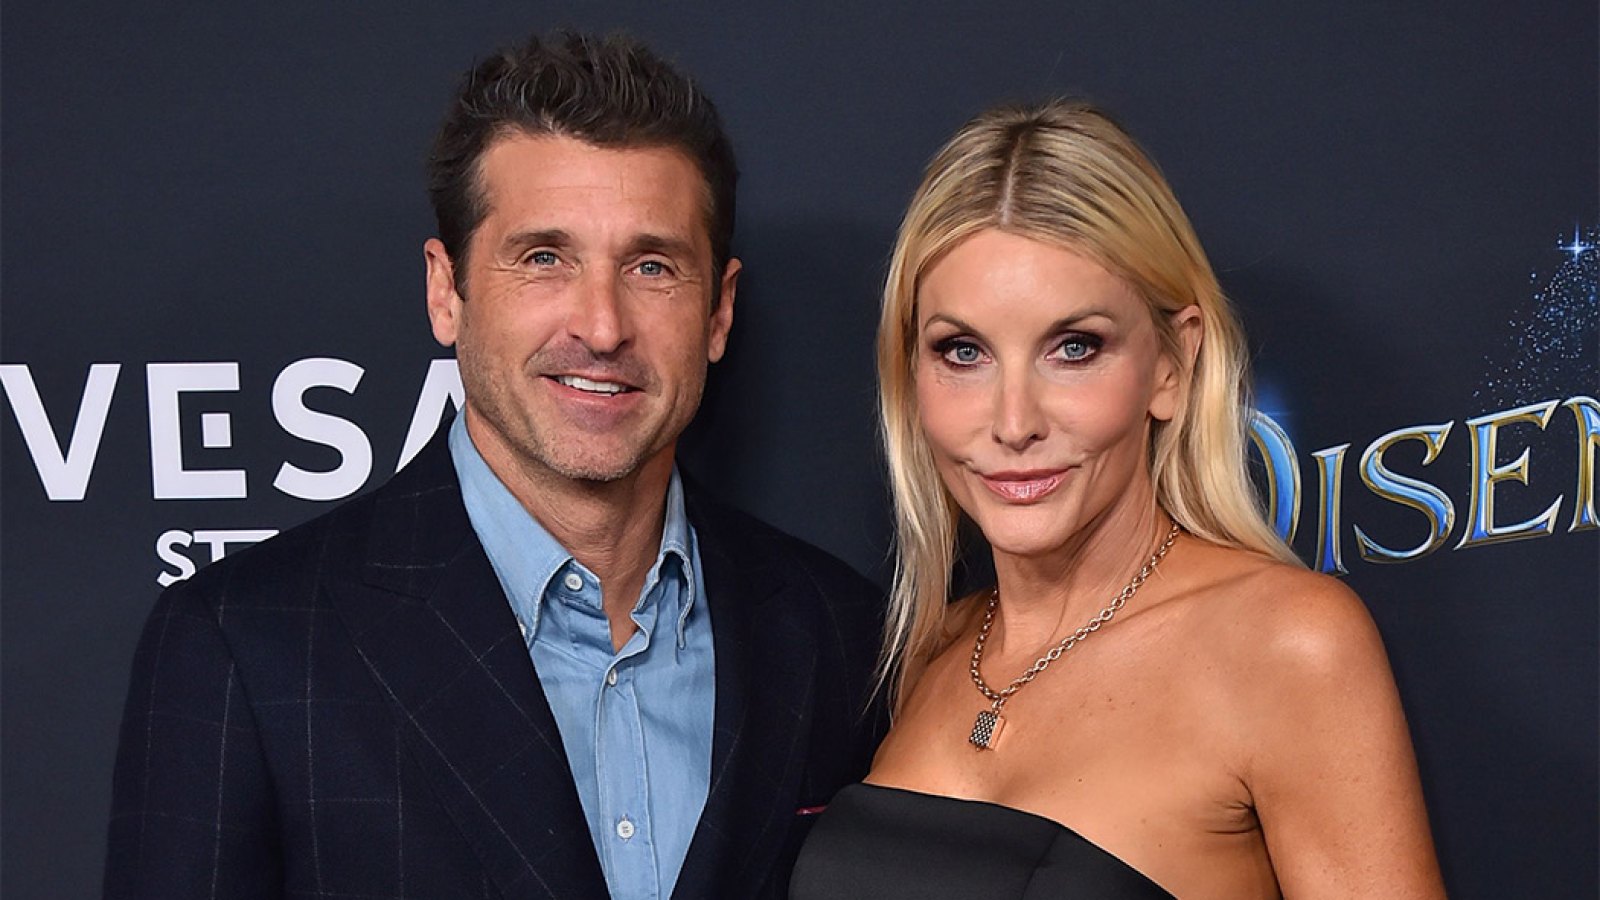 Patrick Dempsey's Wife Gives Him a Facial